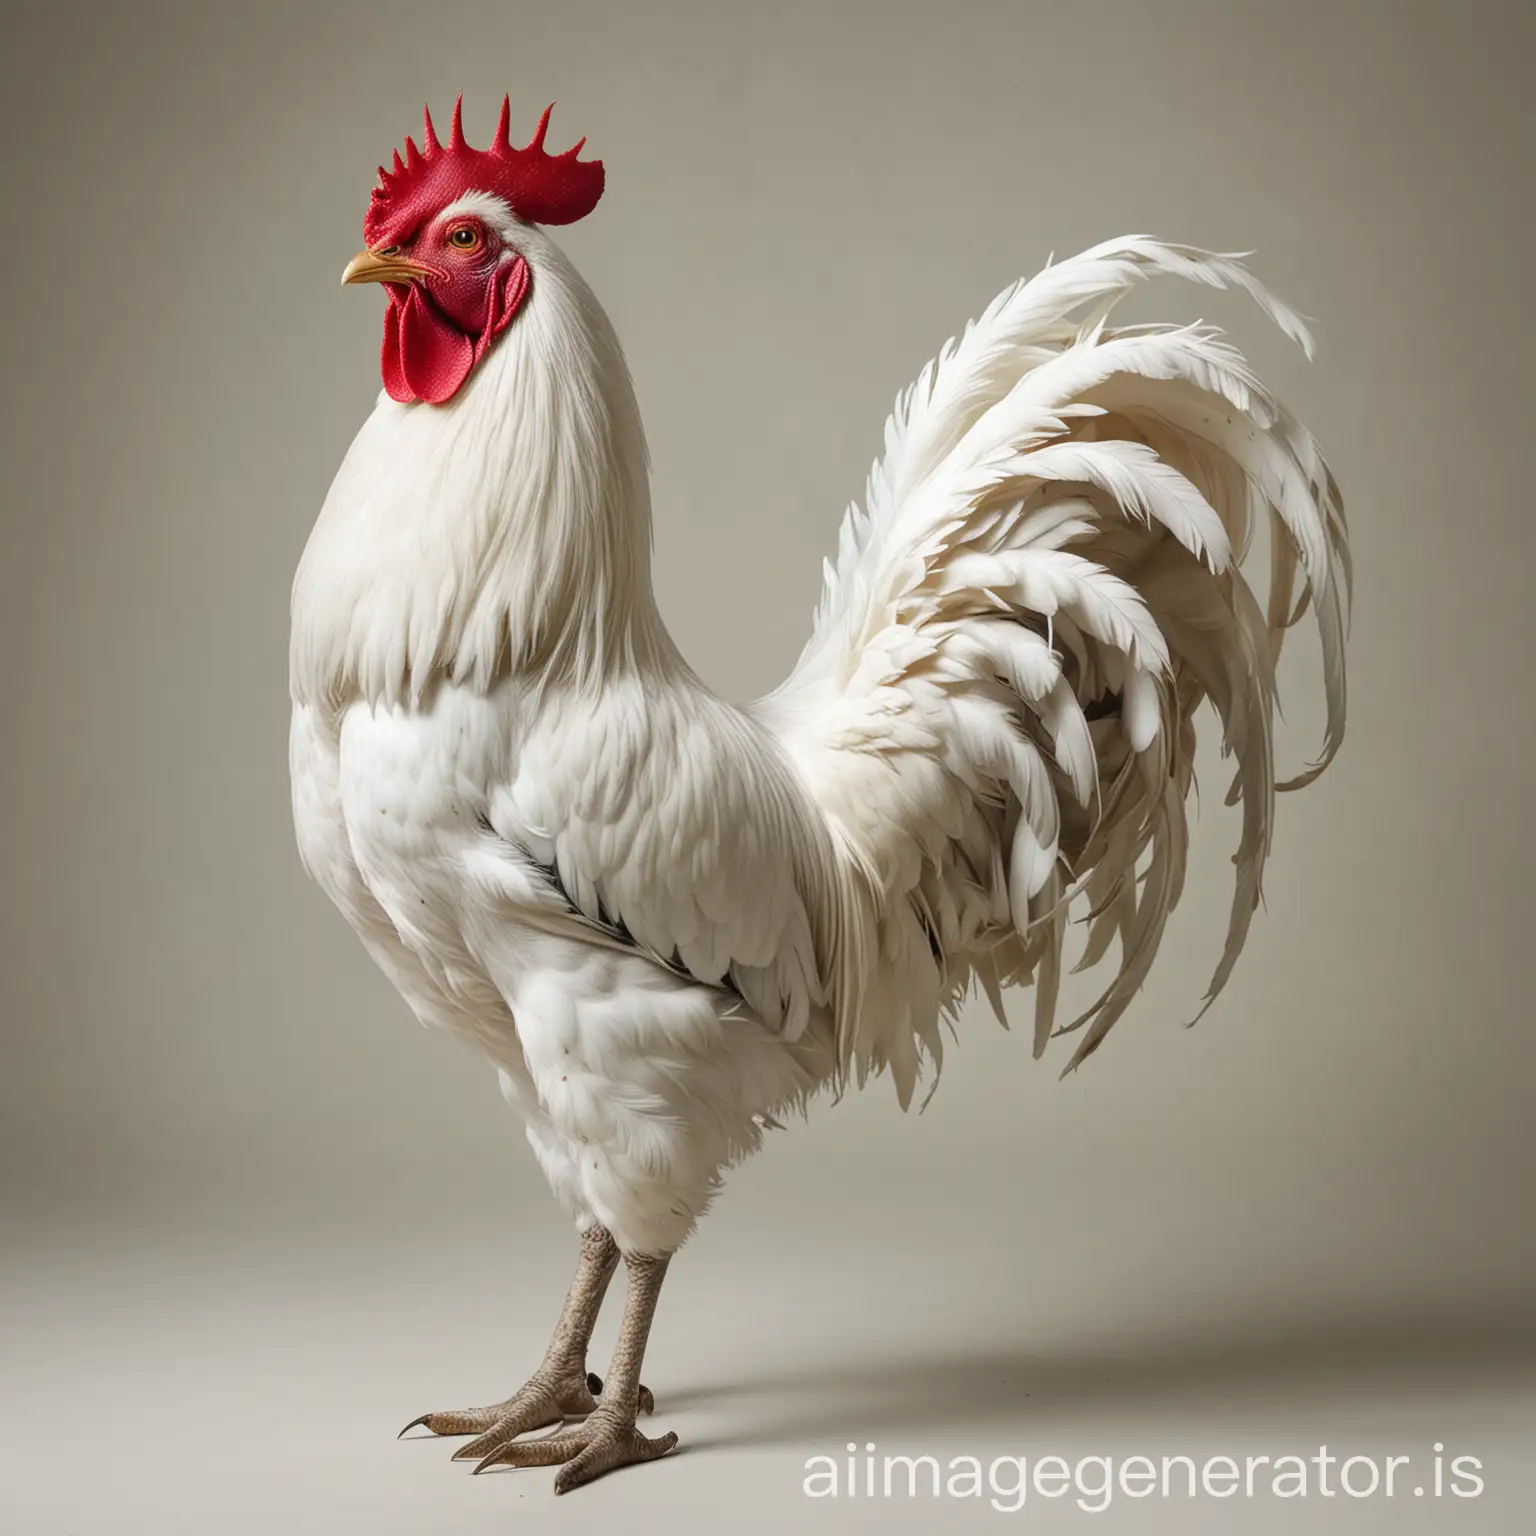 White-Rooster-Posing-for-Portrait-Photograph